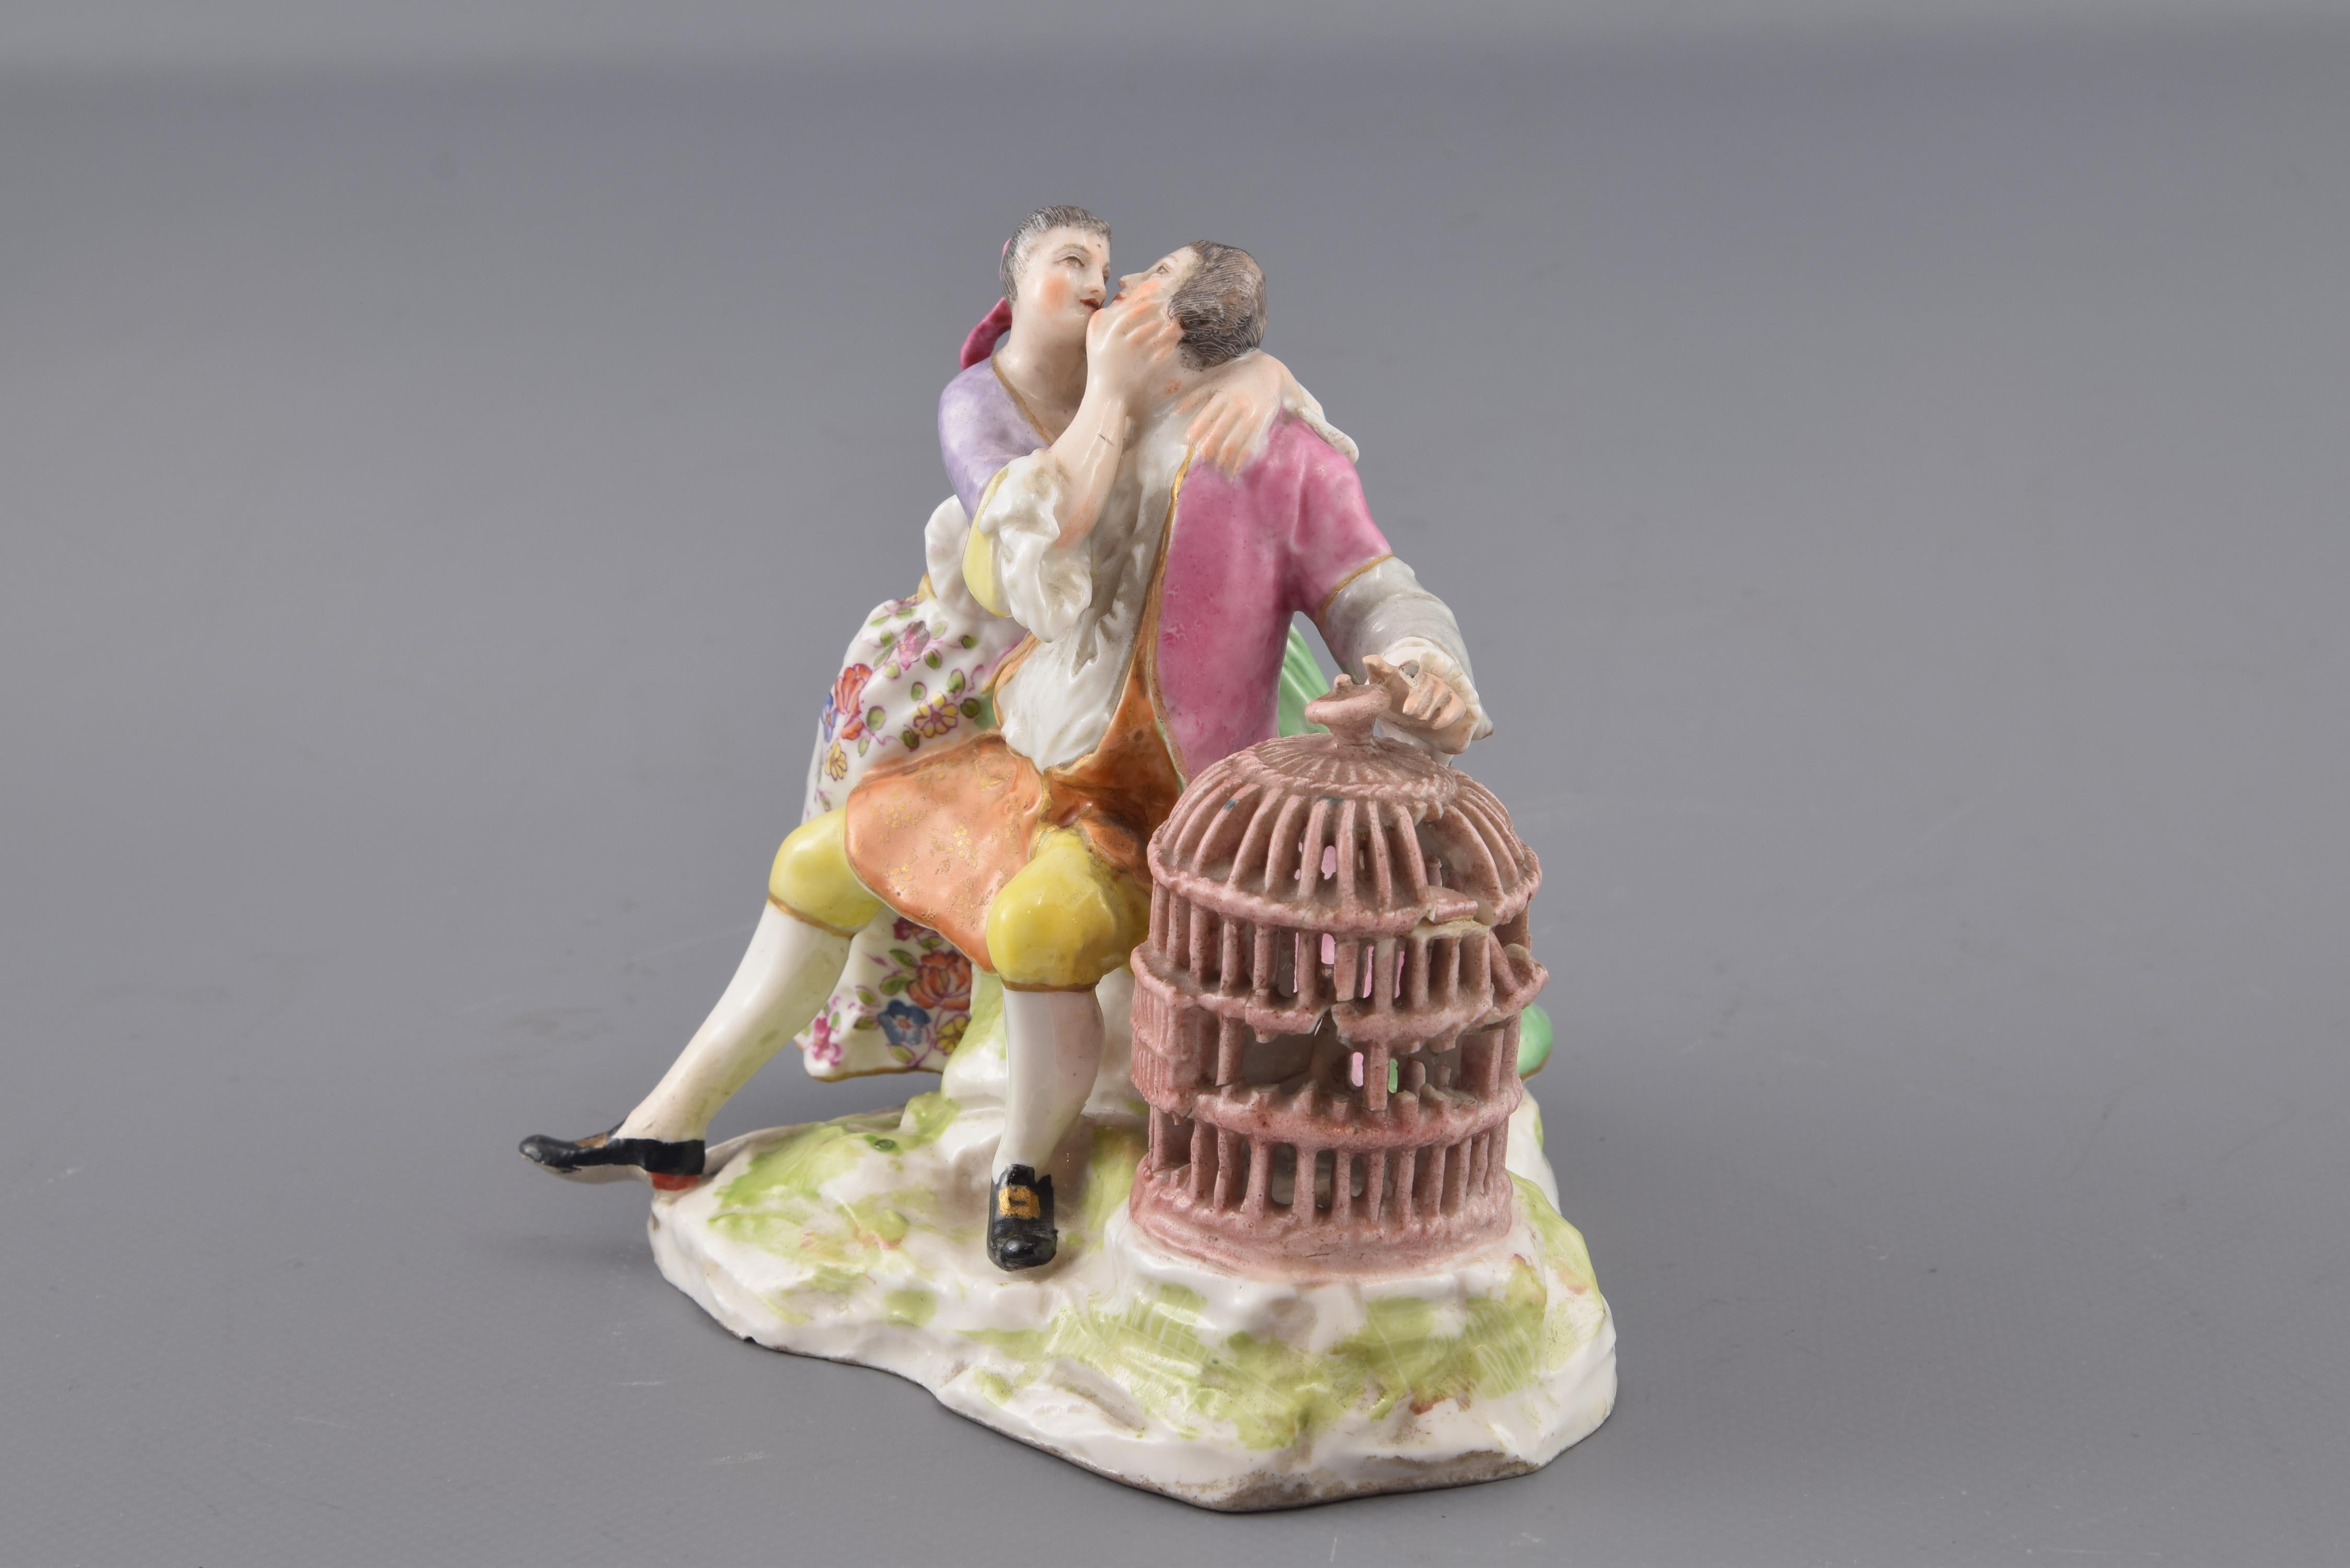 Courtesans and cage. Glazed porcelain. Model Johann Joachim
Enameled porcelain figurine with base resembling rocks and a couple of lovers dressed in the manner of the 18th century, with the boy extending his left hand towards a large bird cage. The